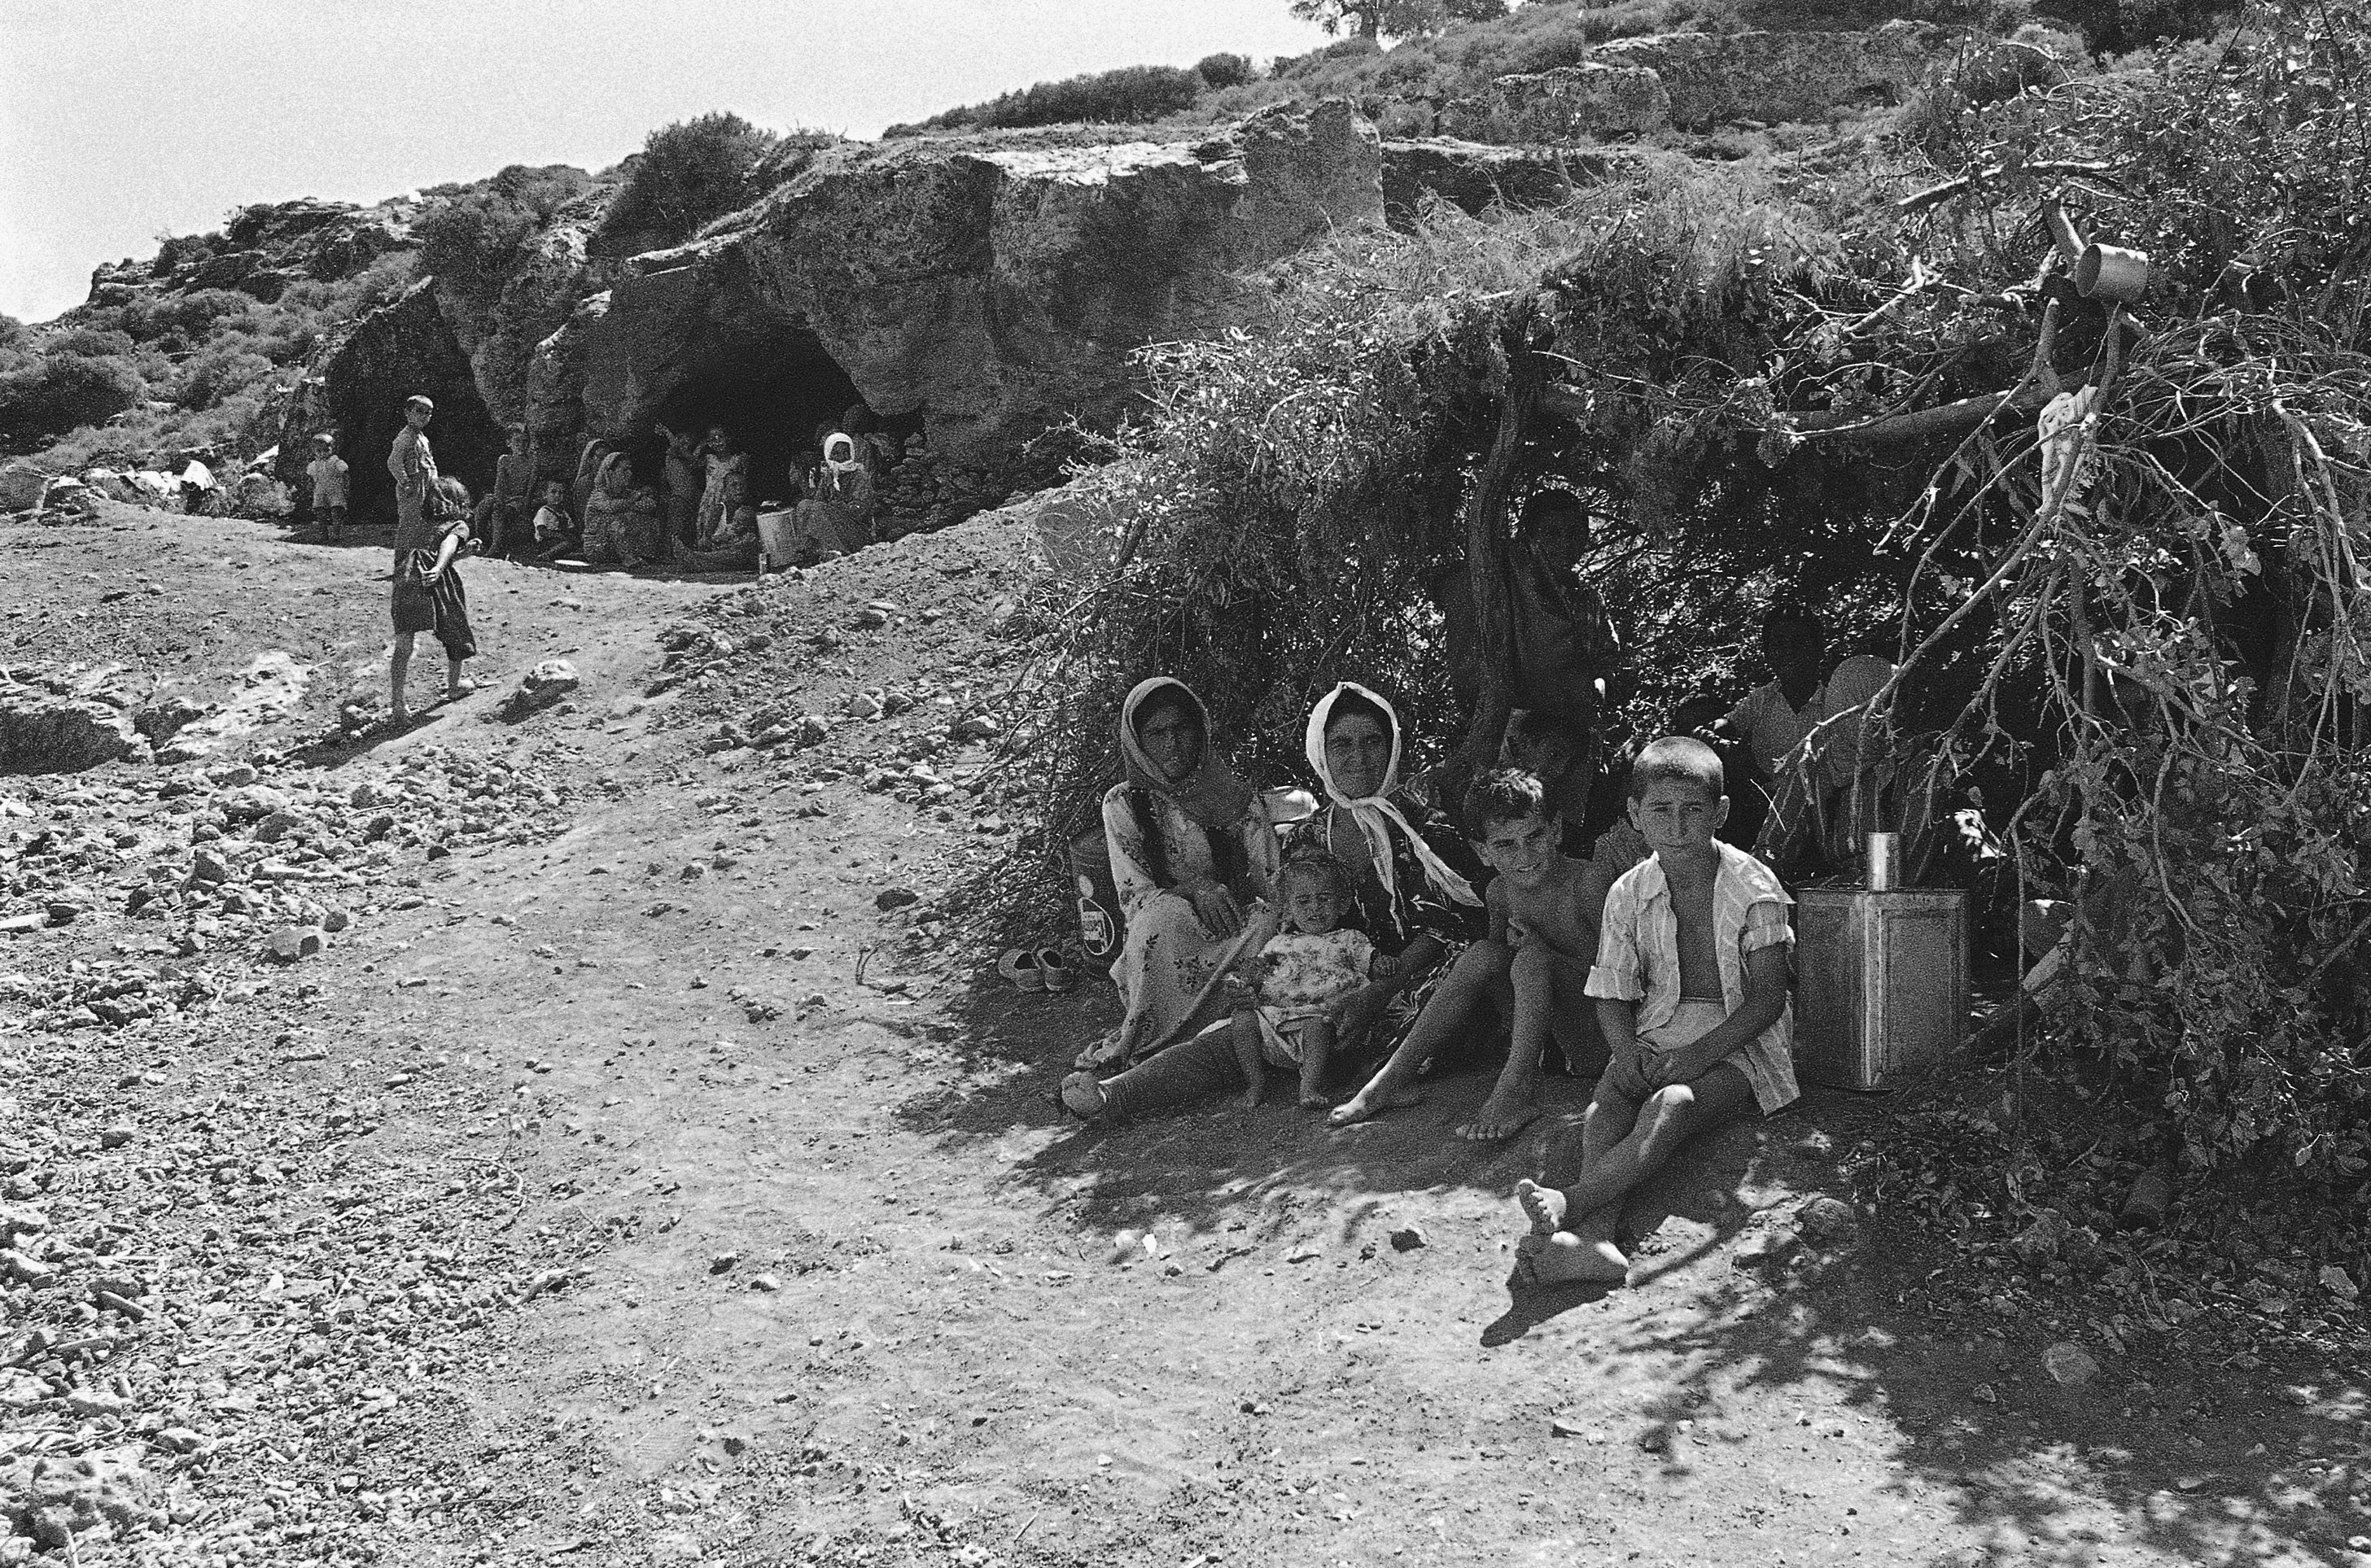 Turkish Cypriot refugees living in caves on a hill outside the village of Kokkina (Erenköy) on Sept. 12, 1964 in Nicosia. The village, housing thousands of refugees starting from 1963, was one of the few areas where arms and supplies could be brought in from Turkey and remained under Greek Cypriot siege for over a decade. (AP Photo)